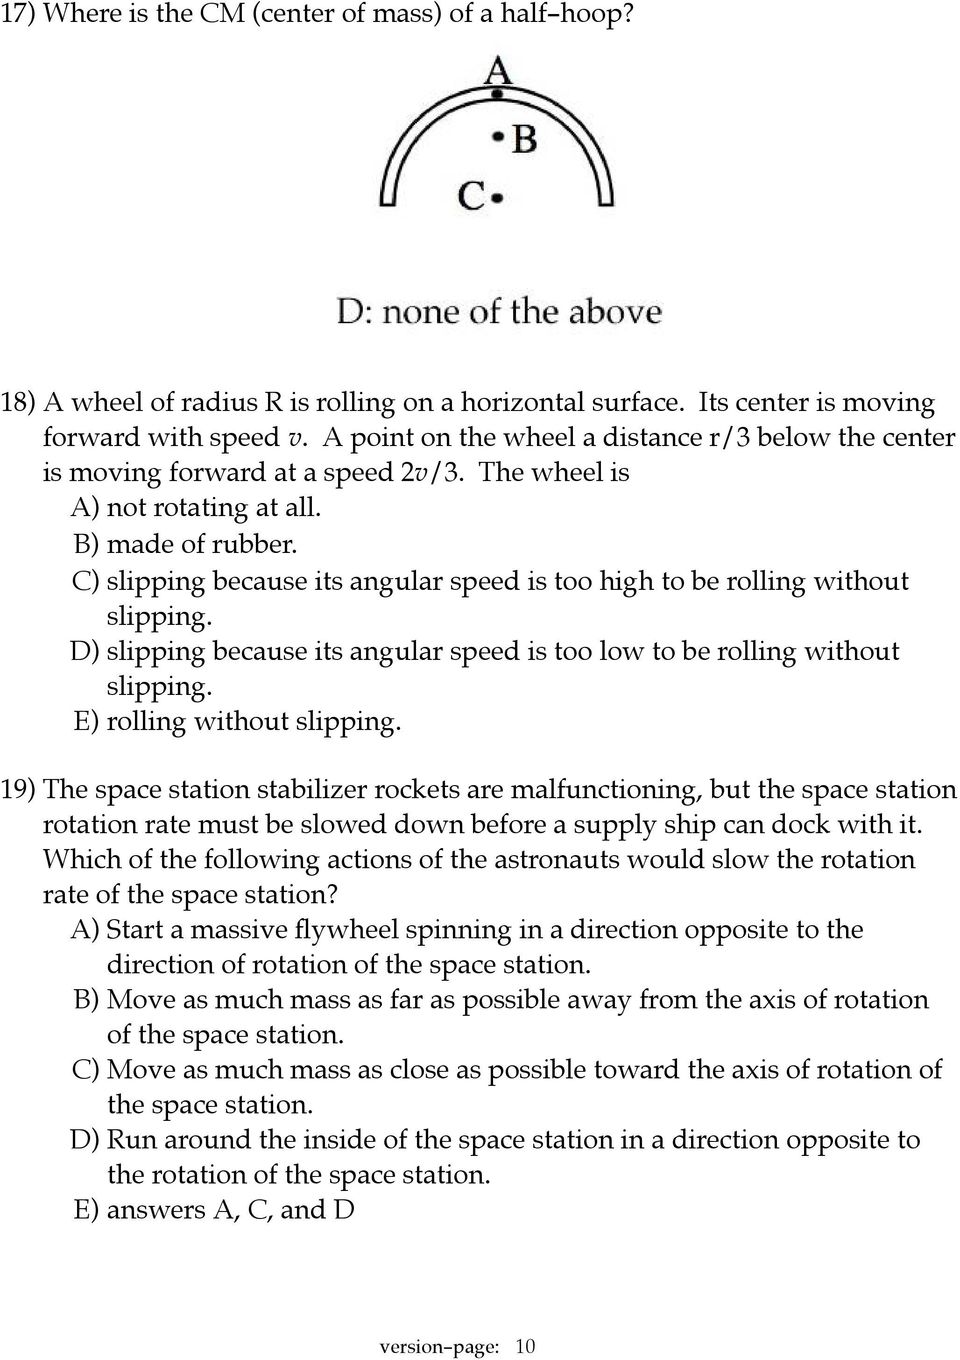 C) slipping because its angular speed is too high to be rolling without slipping. D) slipping because its angular speed is too low to be rolling without slipping. E) rolling without slipping.